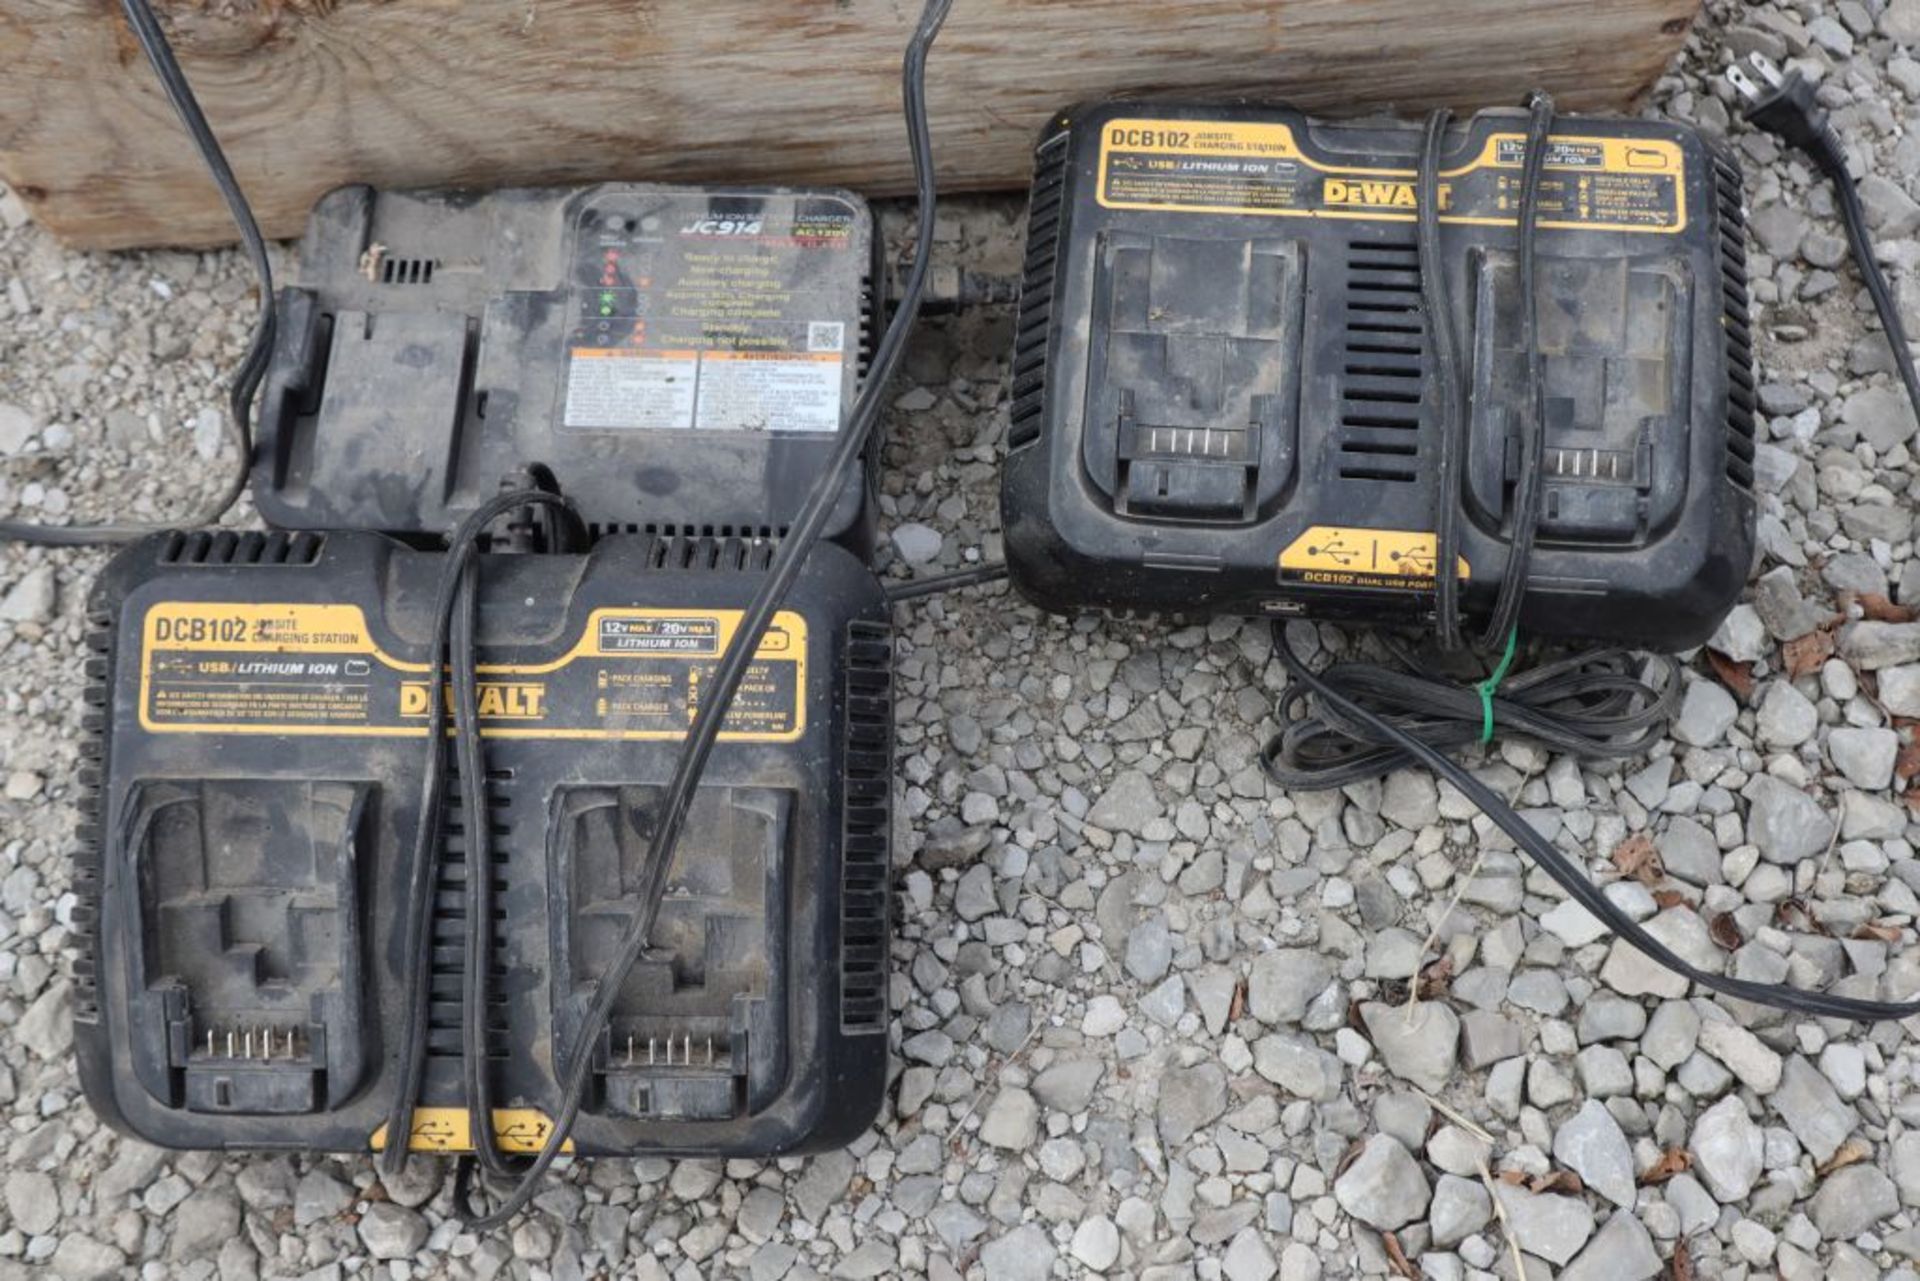 Battery chargers for cordless drills.